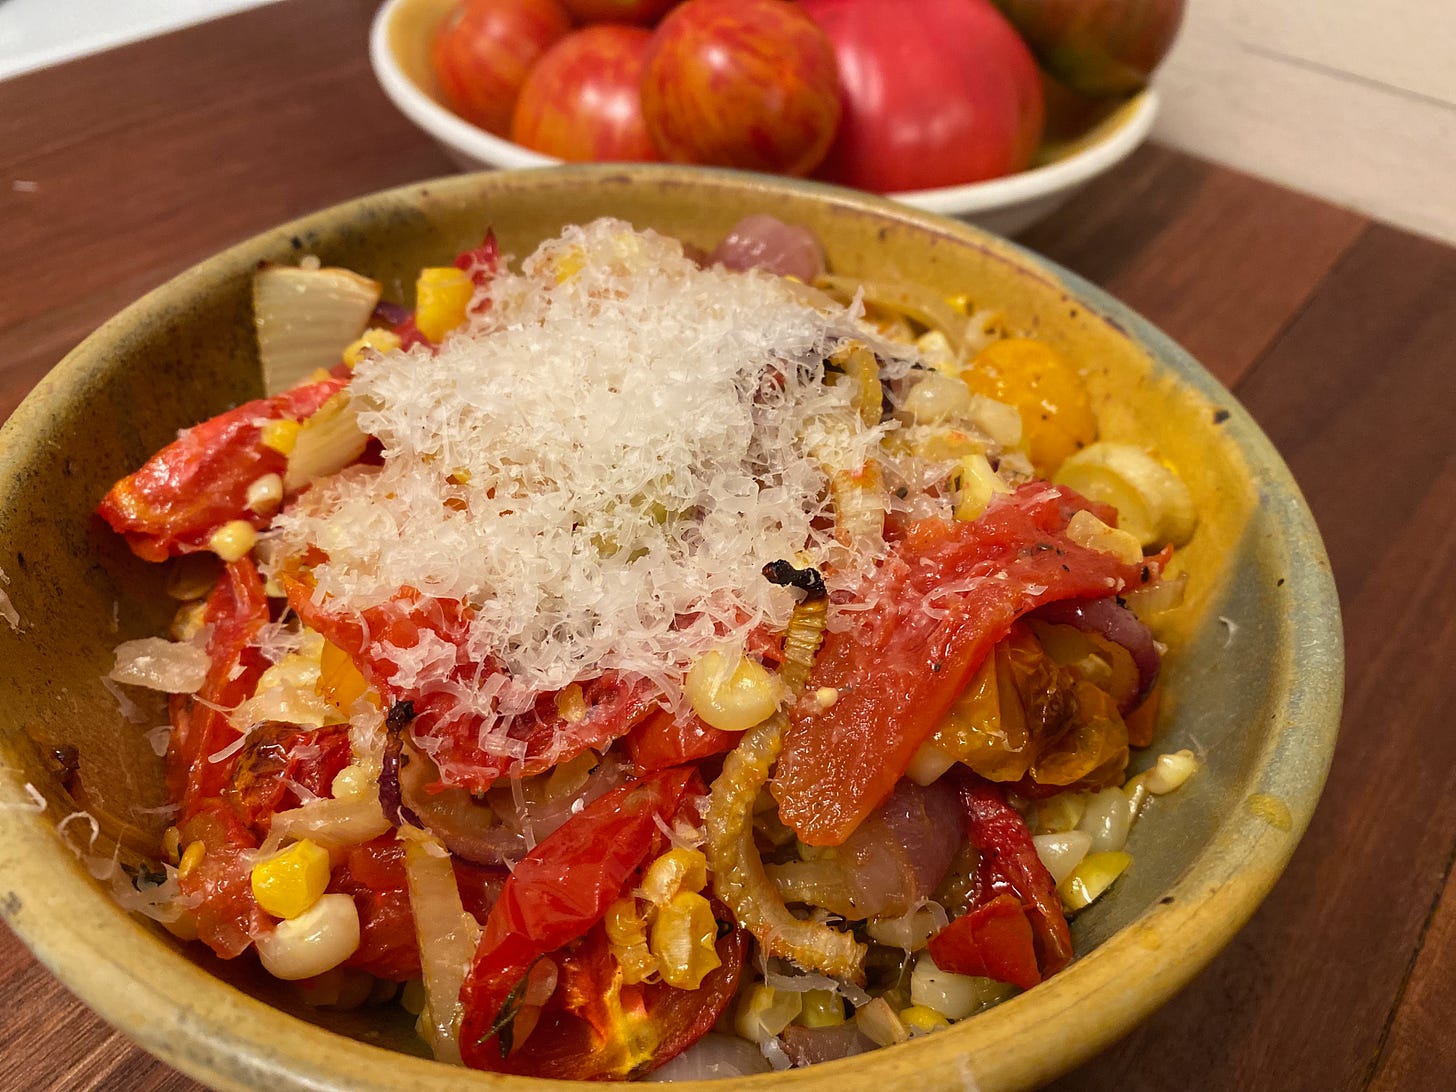 A ceramic bowl of roasted tomatoes, fennel, onions, and corn, topped with a pile of grated Parmesan cheese. The bowl sits on a wooden counter, with part of a bowl of whole tomatoes visible in the background.